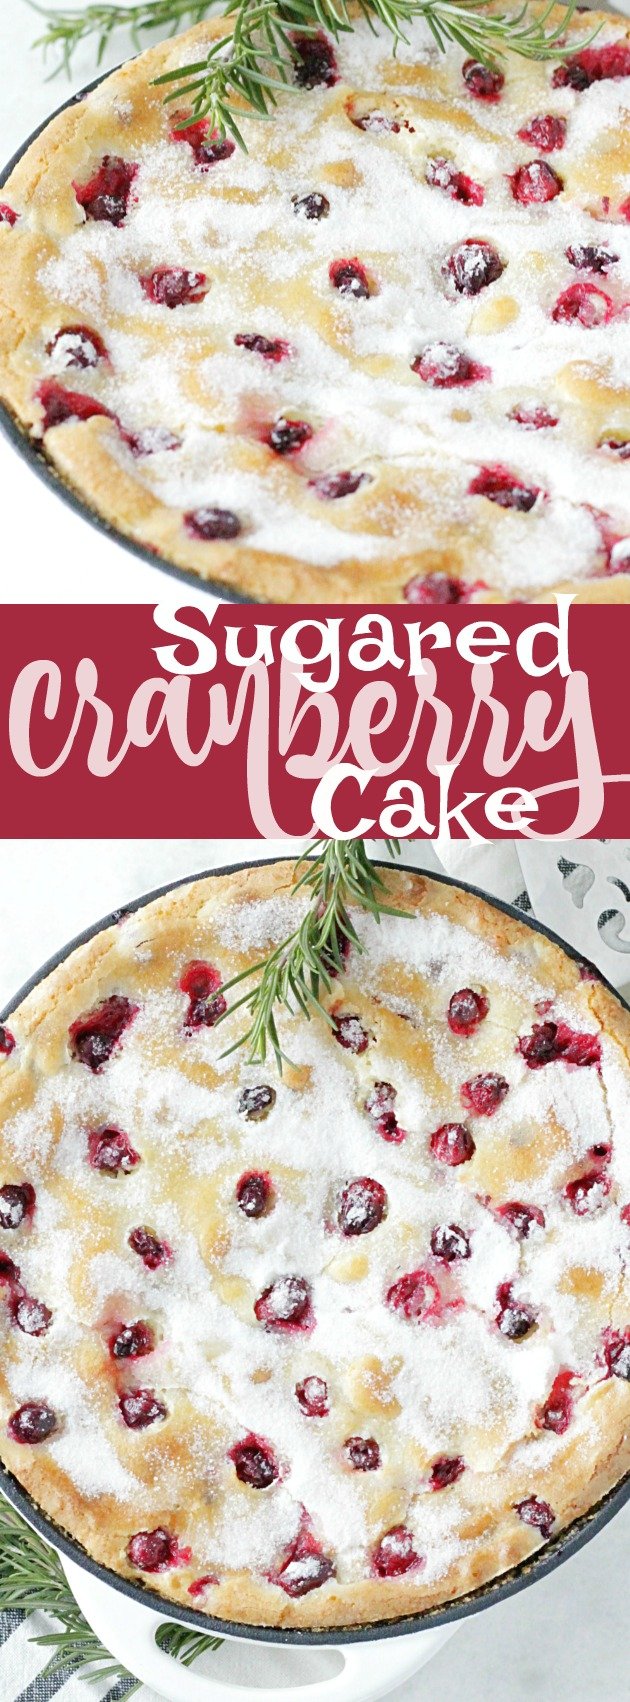 This Sugared Cranberry Cake is the holiday-perfect version of one of my most popular recipes of all time French Strawberry Cake. via @foodtasticmom